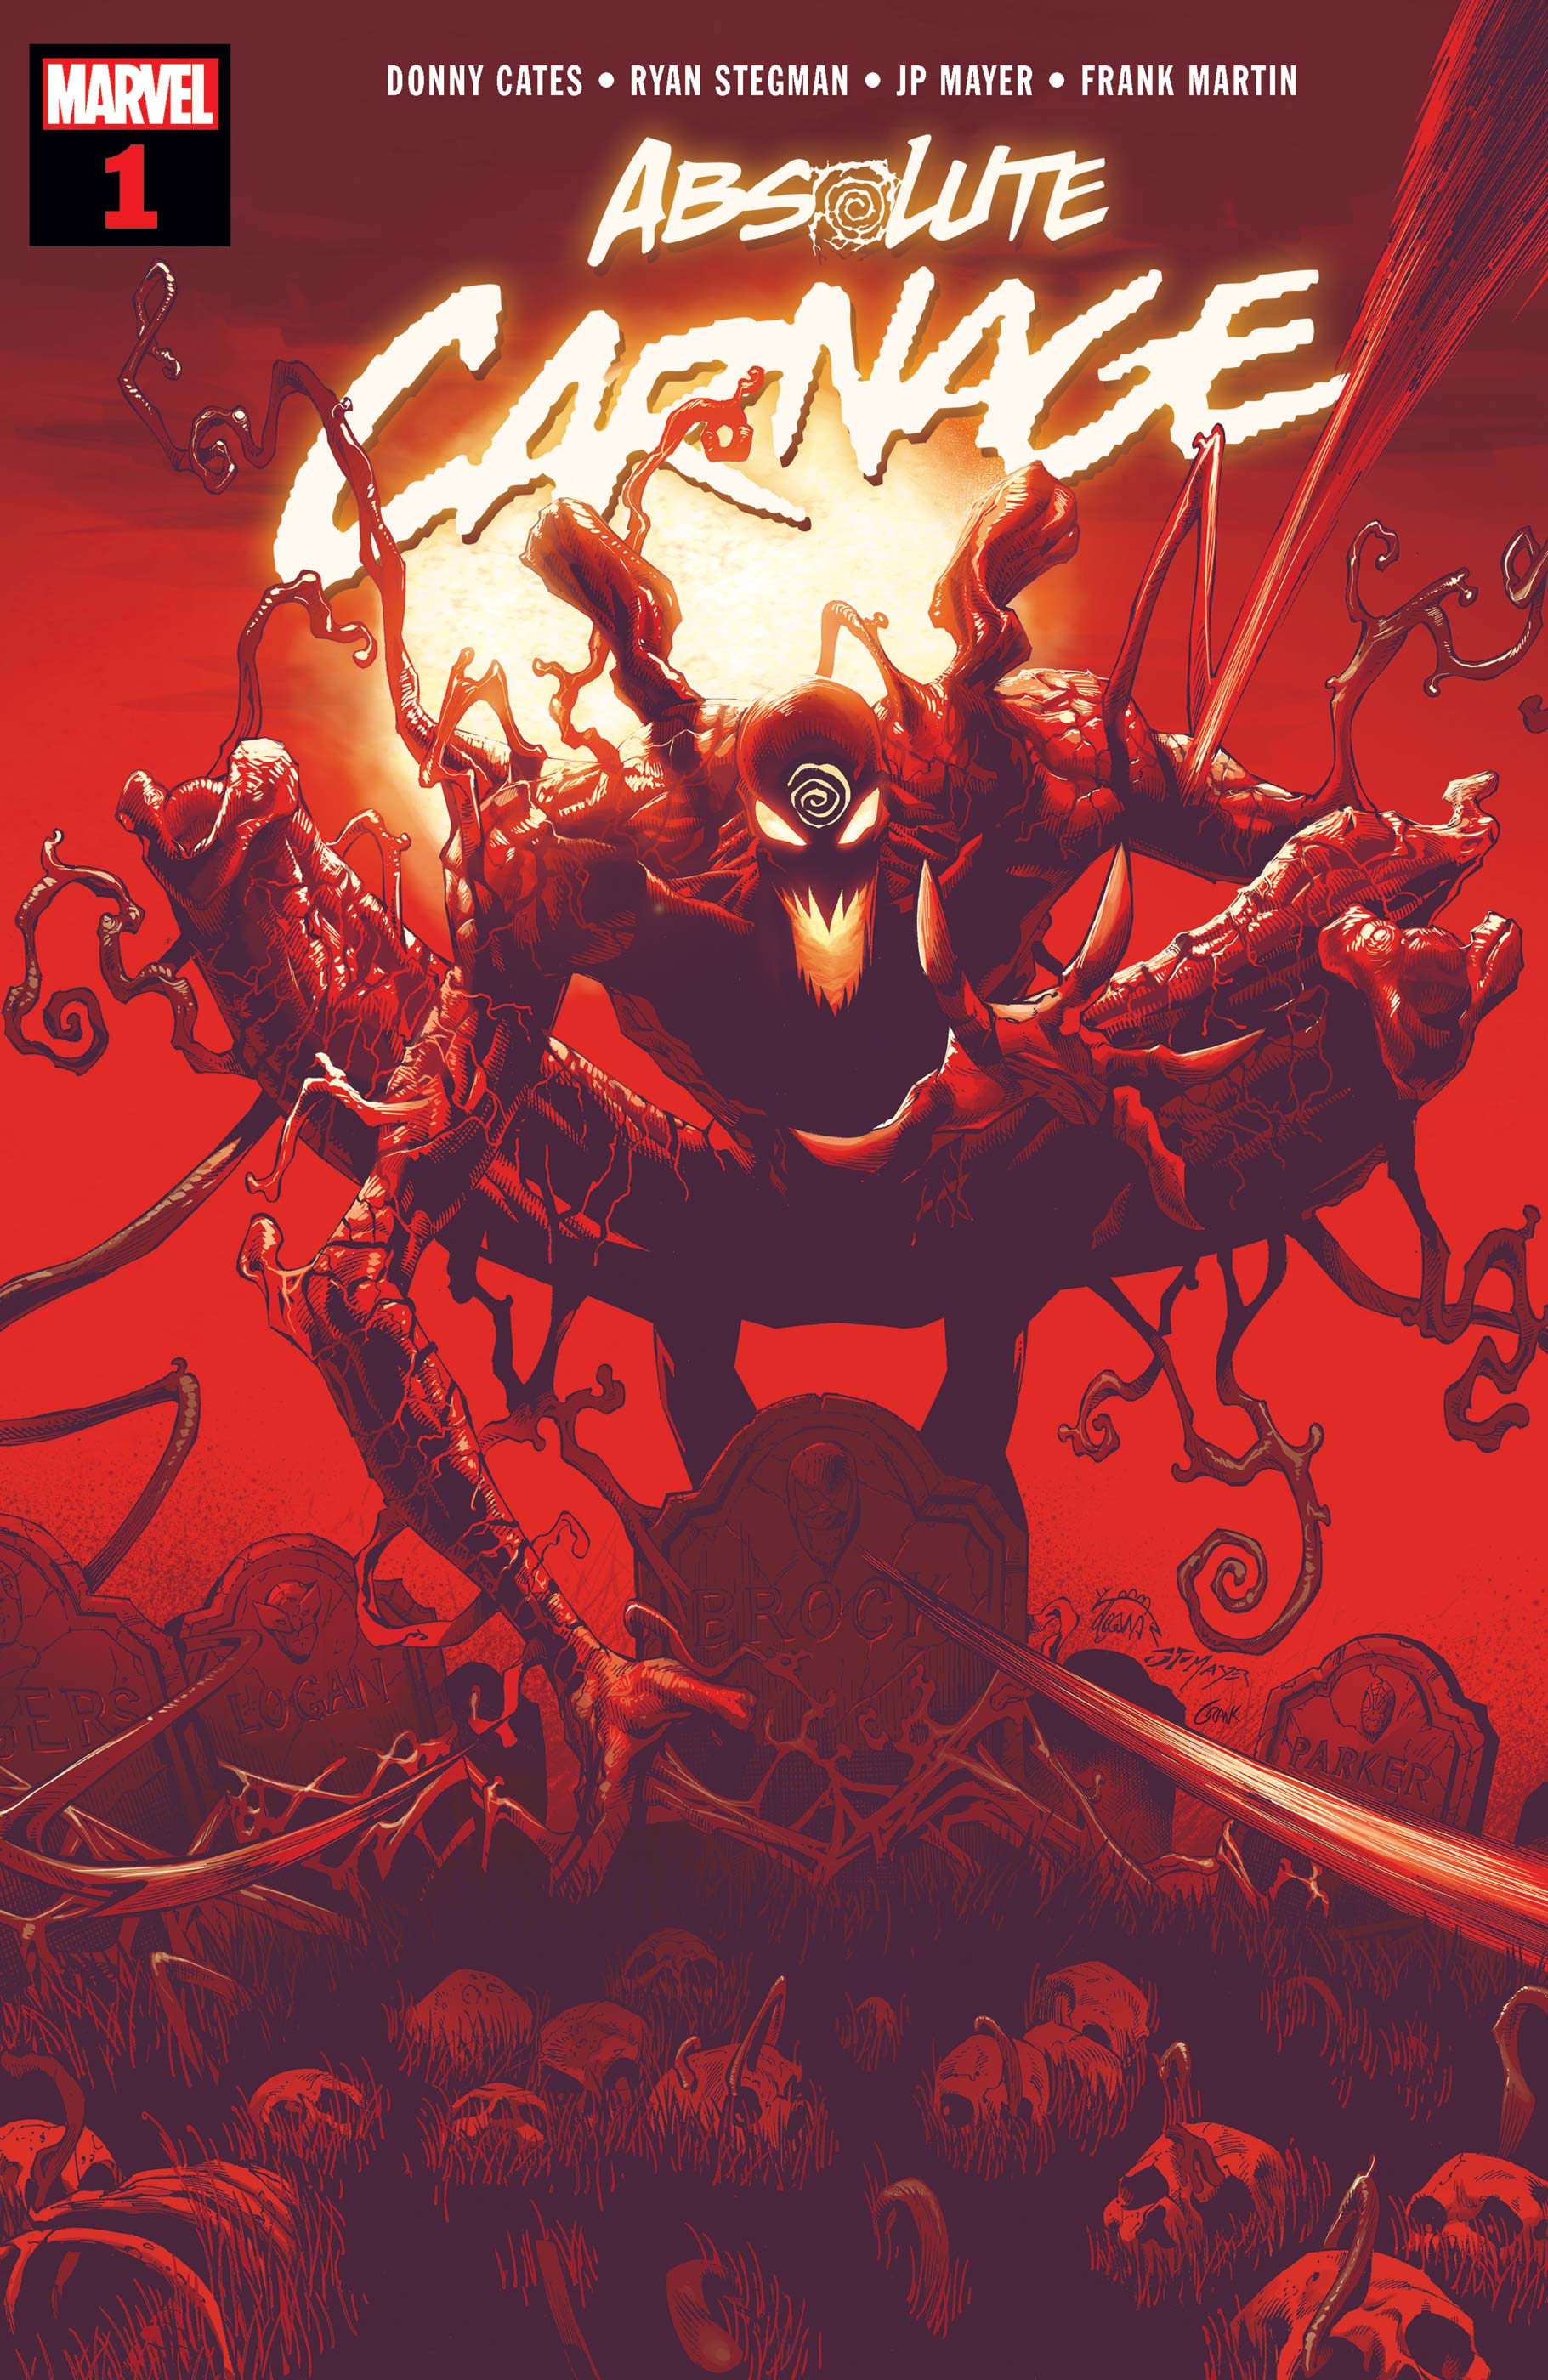 Absolute Carnage (2019) #1